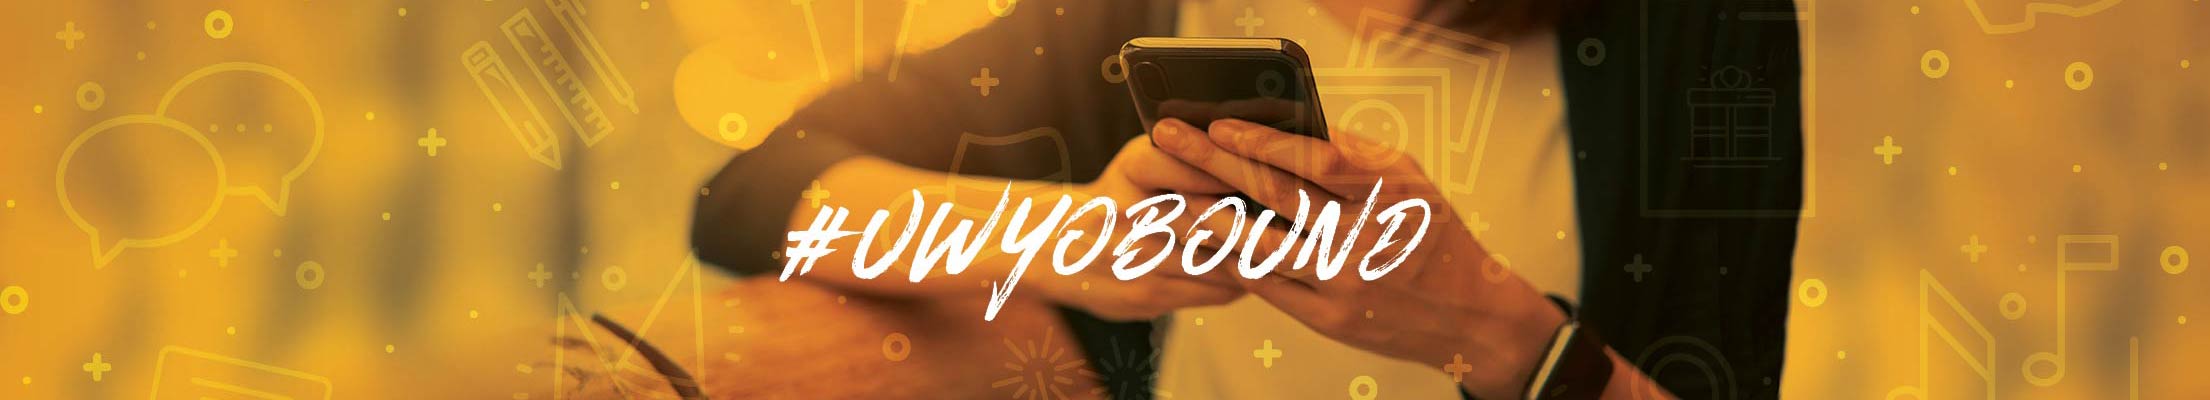 A girl uses her smarthphone with the hashtag #uwyobound over top